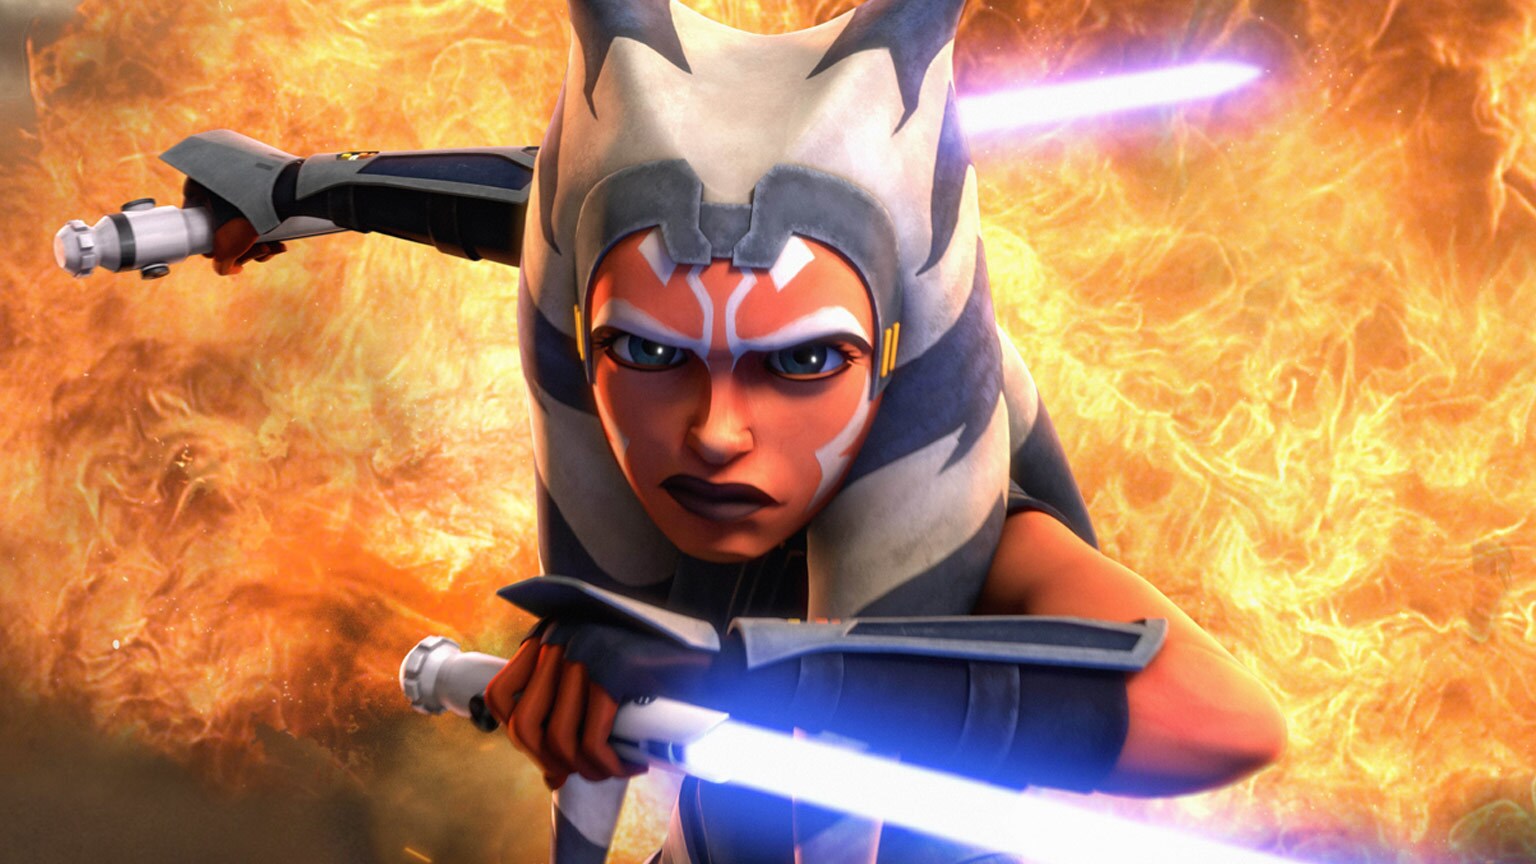 SWCC 2019: 9 Things We Learned from the Star Wars: The Clone Wars Panel